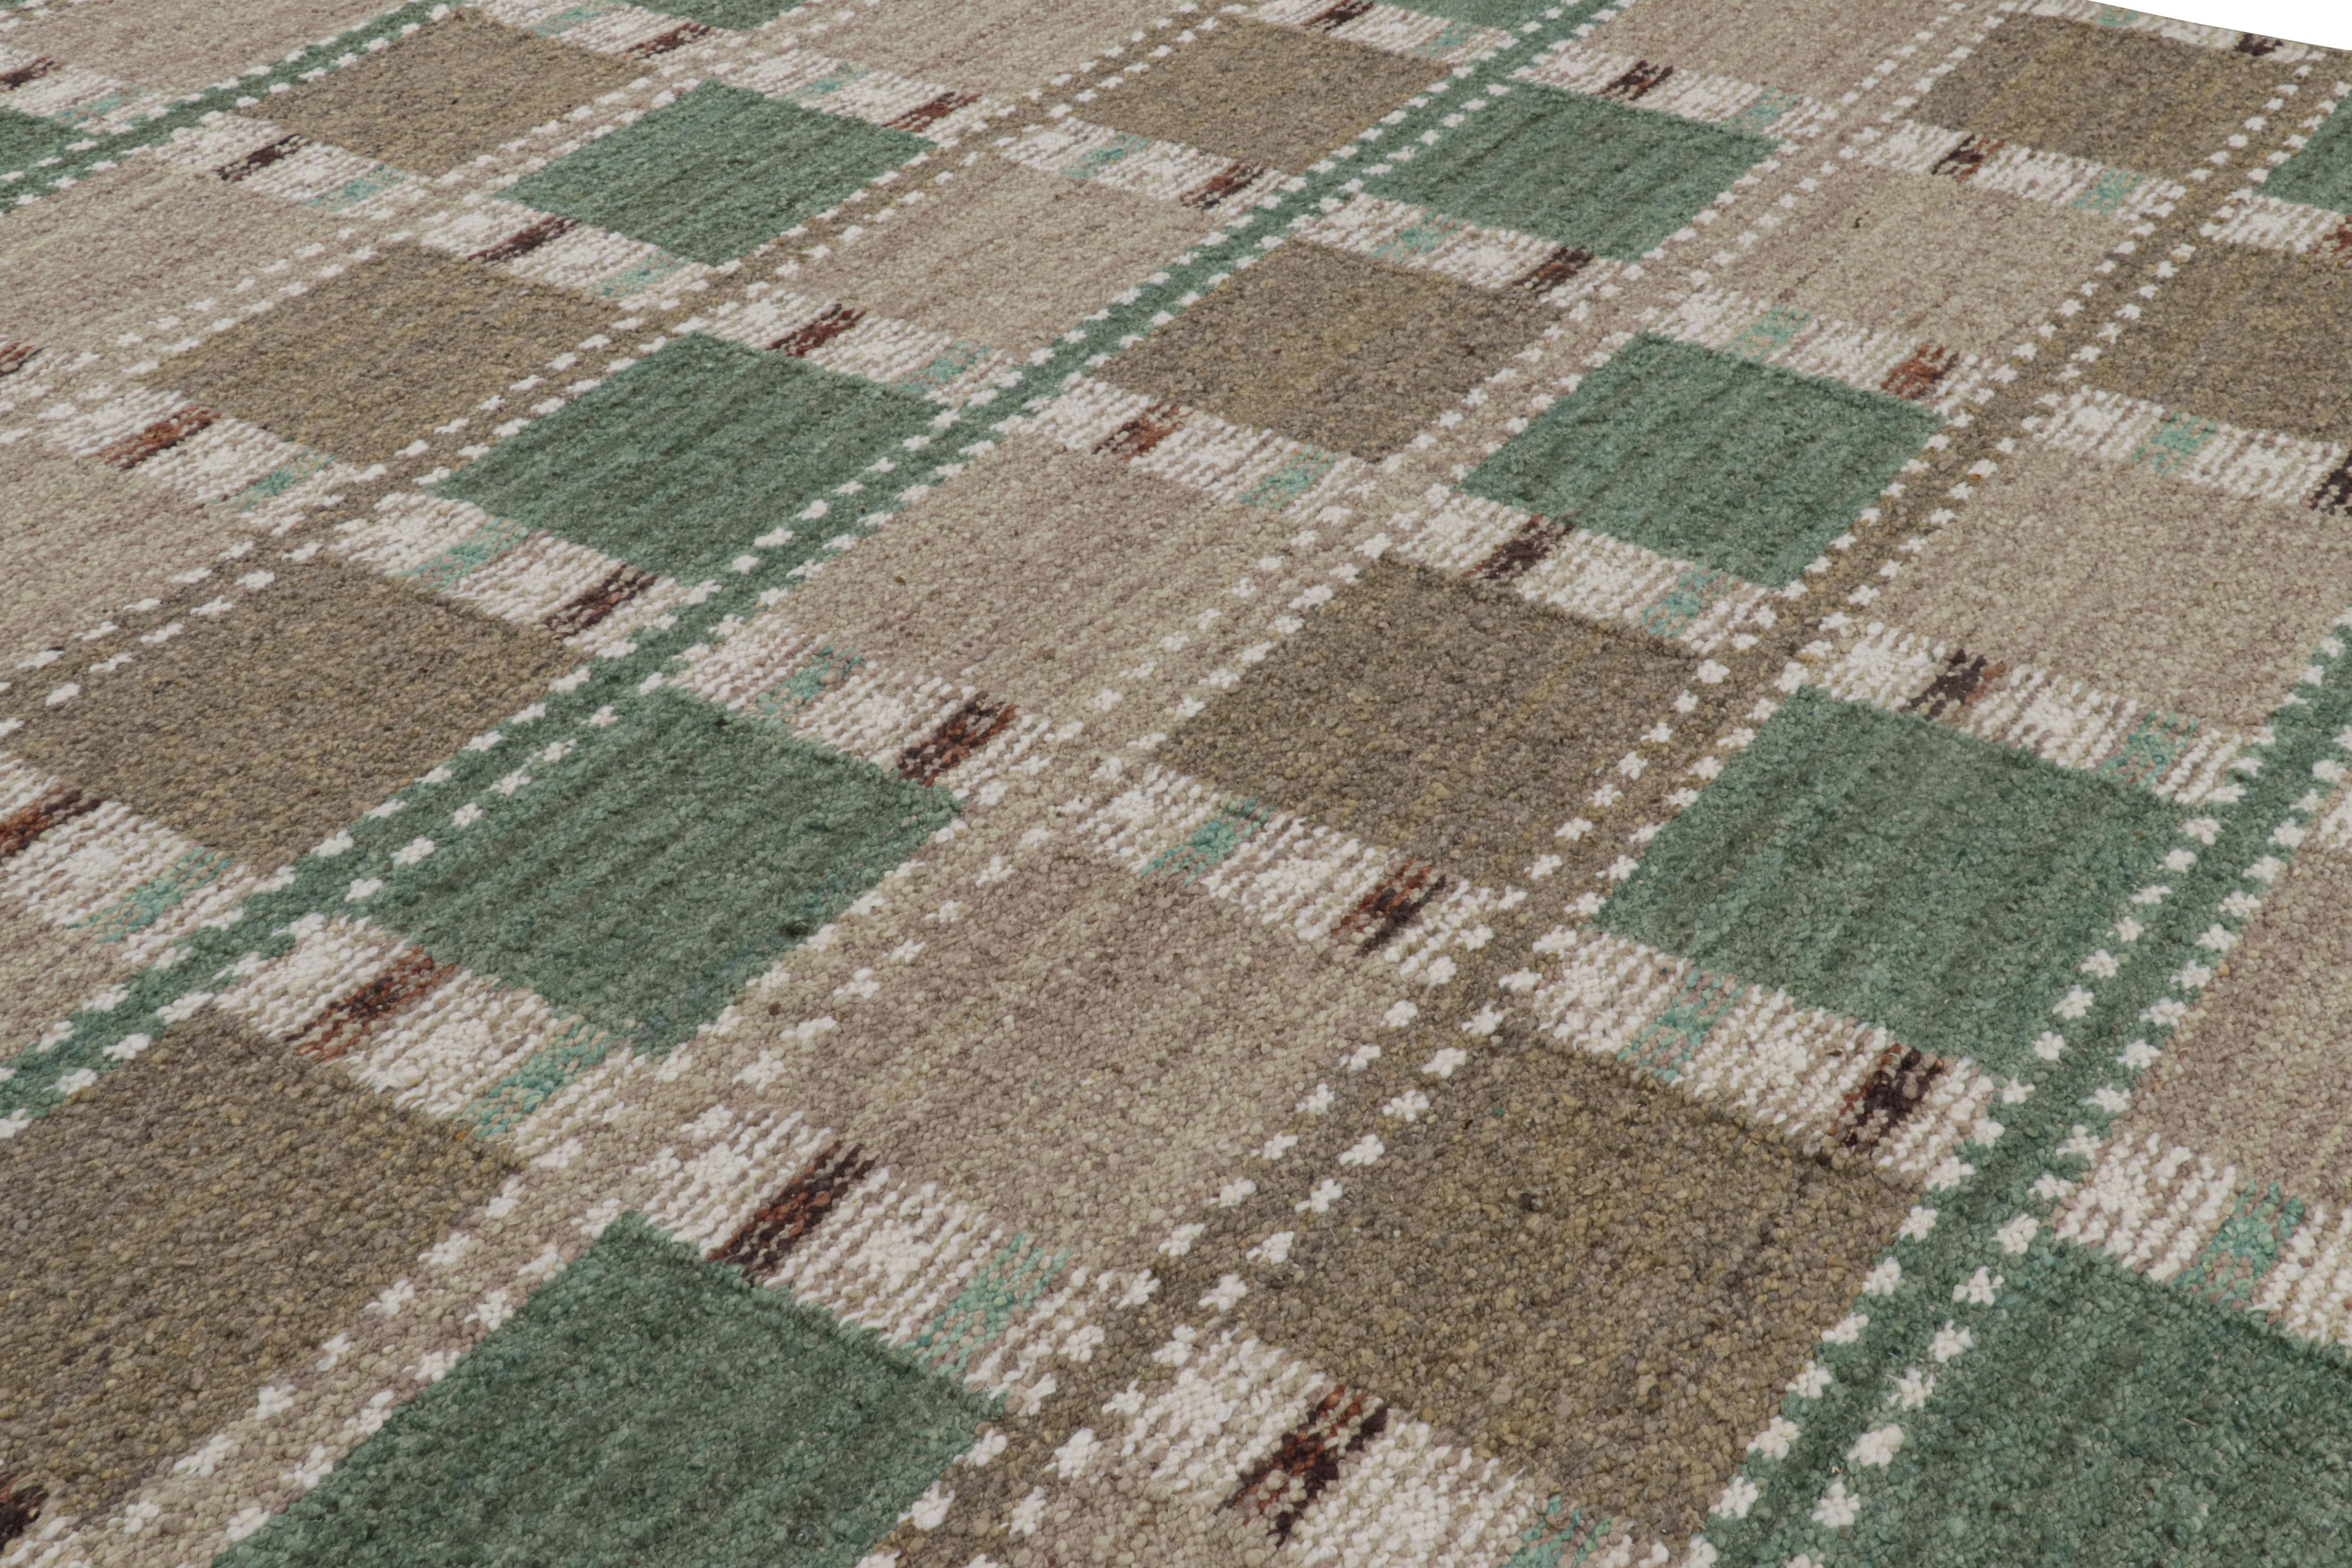 This 10x14 Swedish-style rug, handwoven in a wool flatweave, is from the inventive “Nu” texture in Rug & Kilim’s award-winning Scandinavian flat weave collection. 

On the Design: 

The “Nu” construction enjoys a boucle-like texture of blended